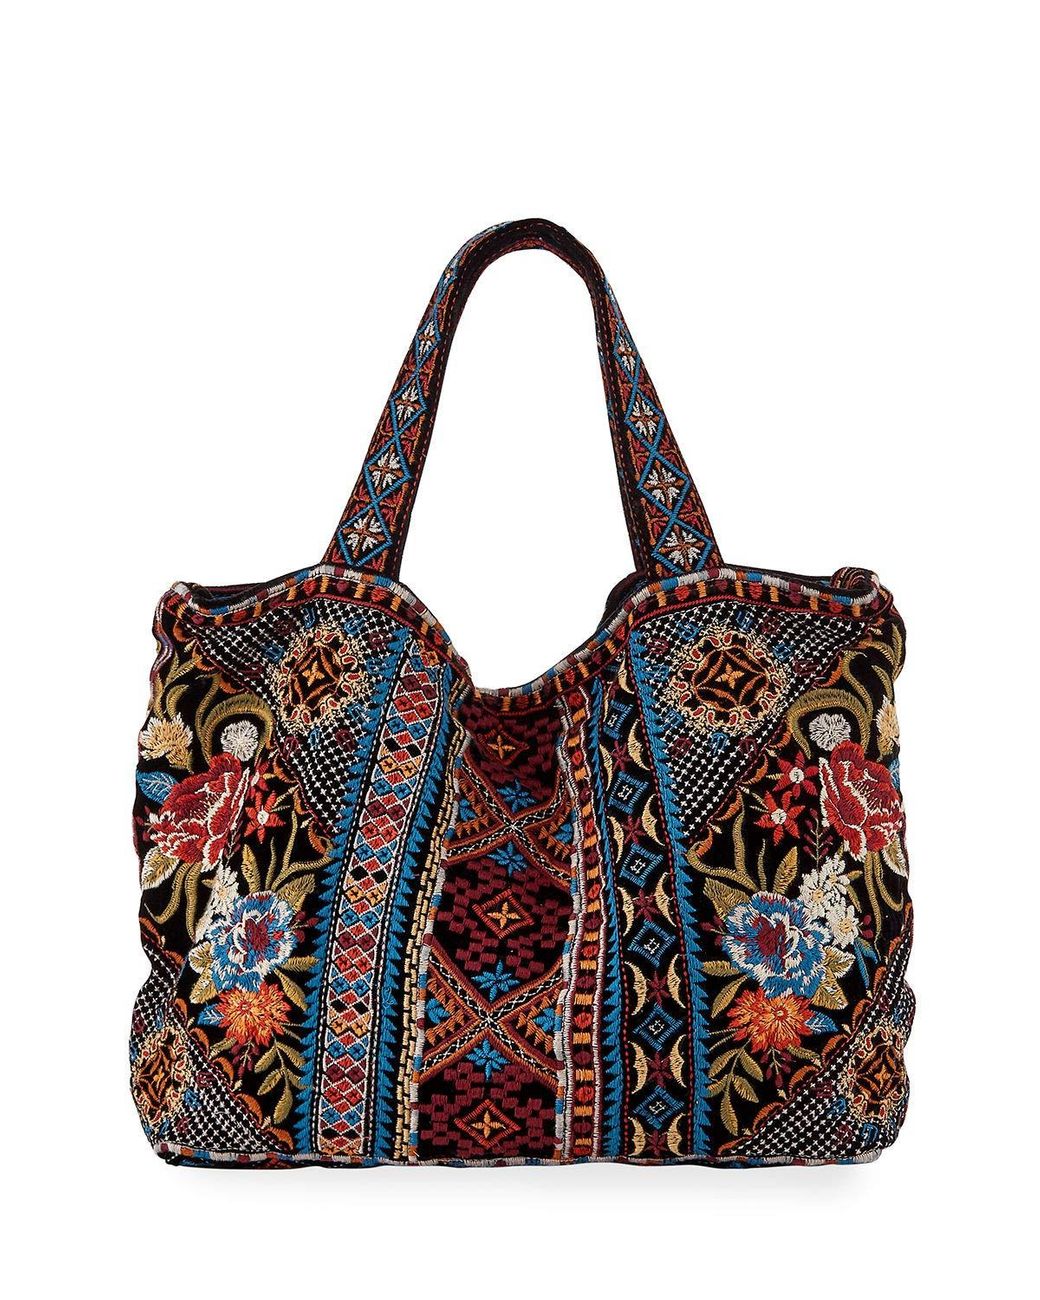 Johnny Was Velvet Tote Bag With All Over Multicolored Embroidery | Lyst